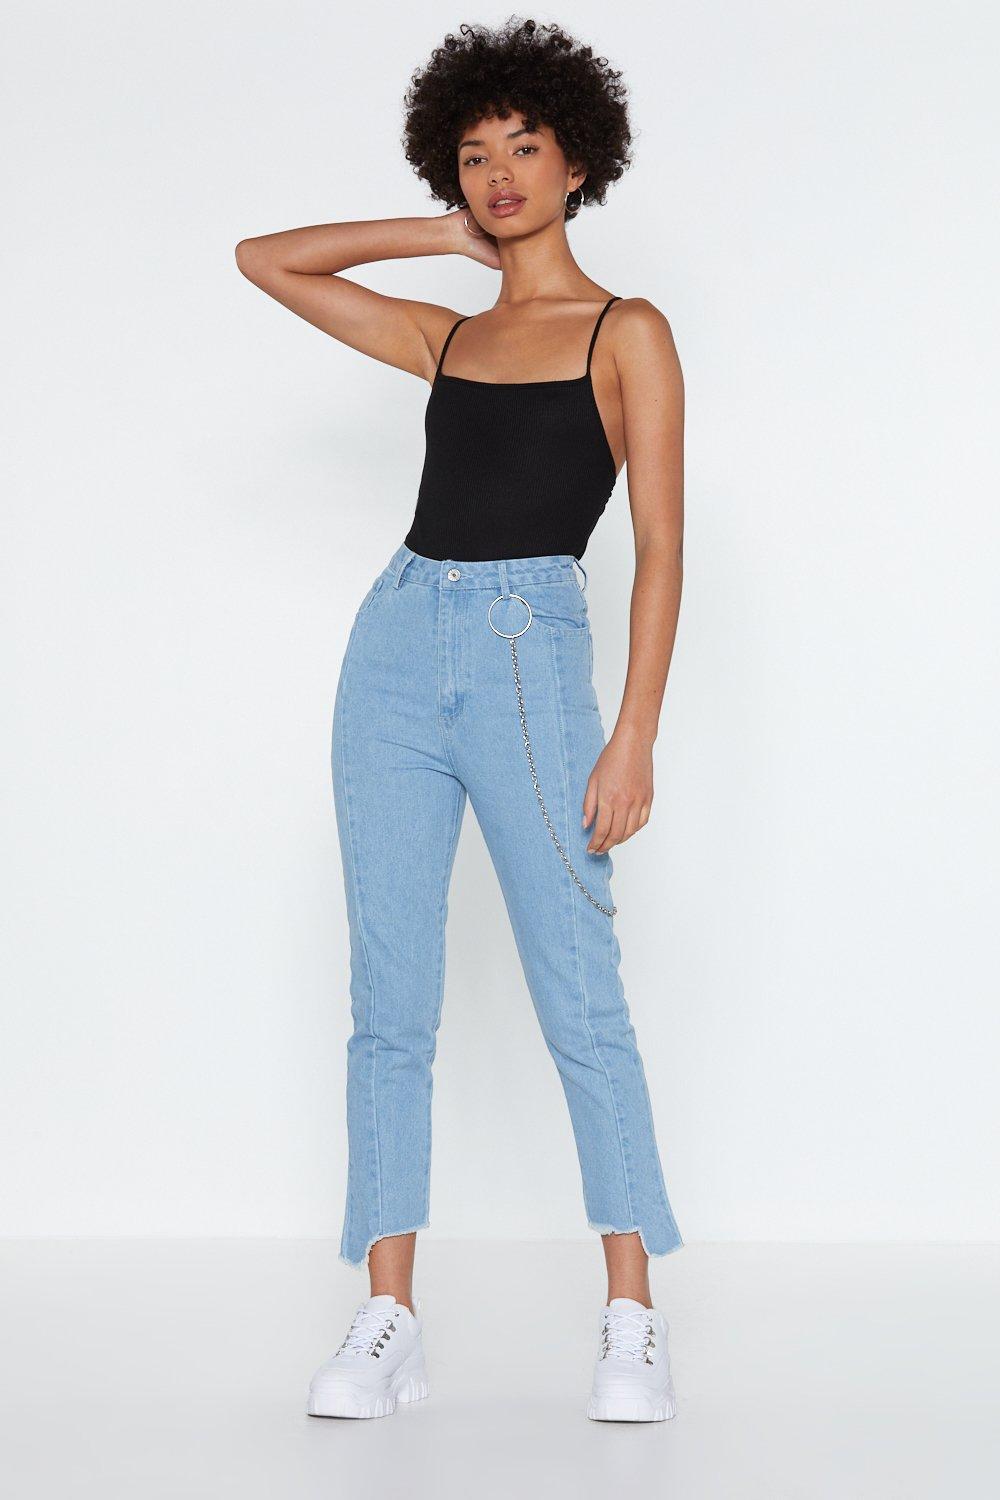 At a Loose End Frayed Jeans | Nasty Gal